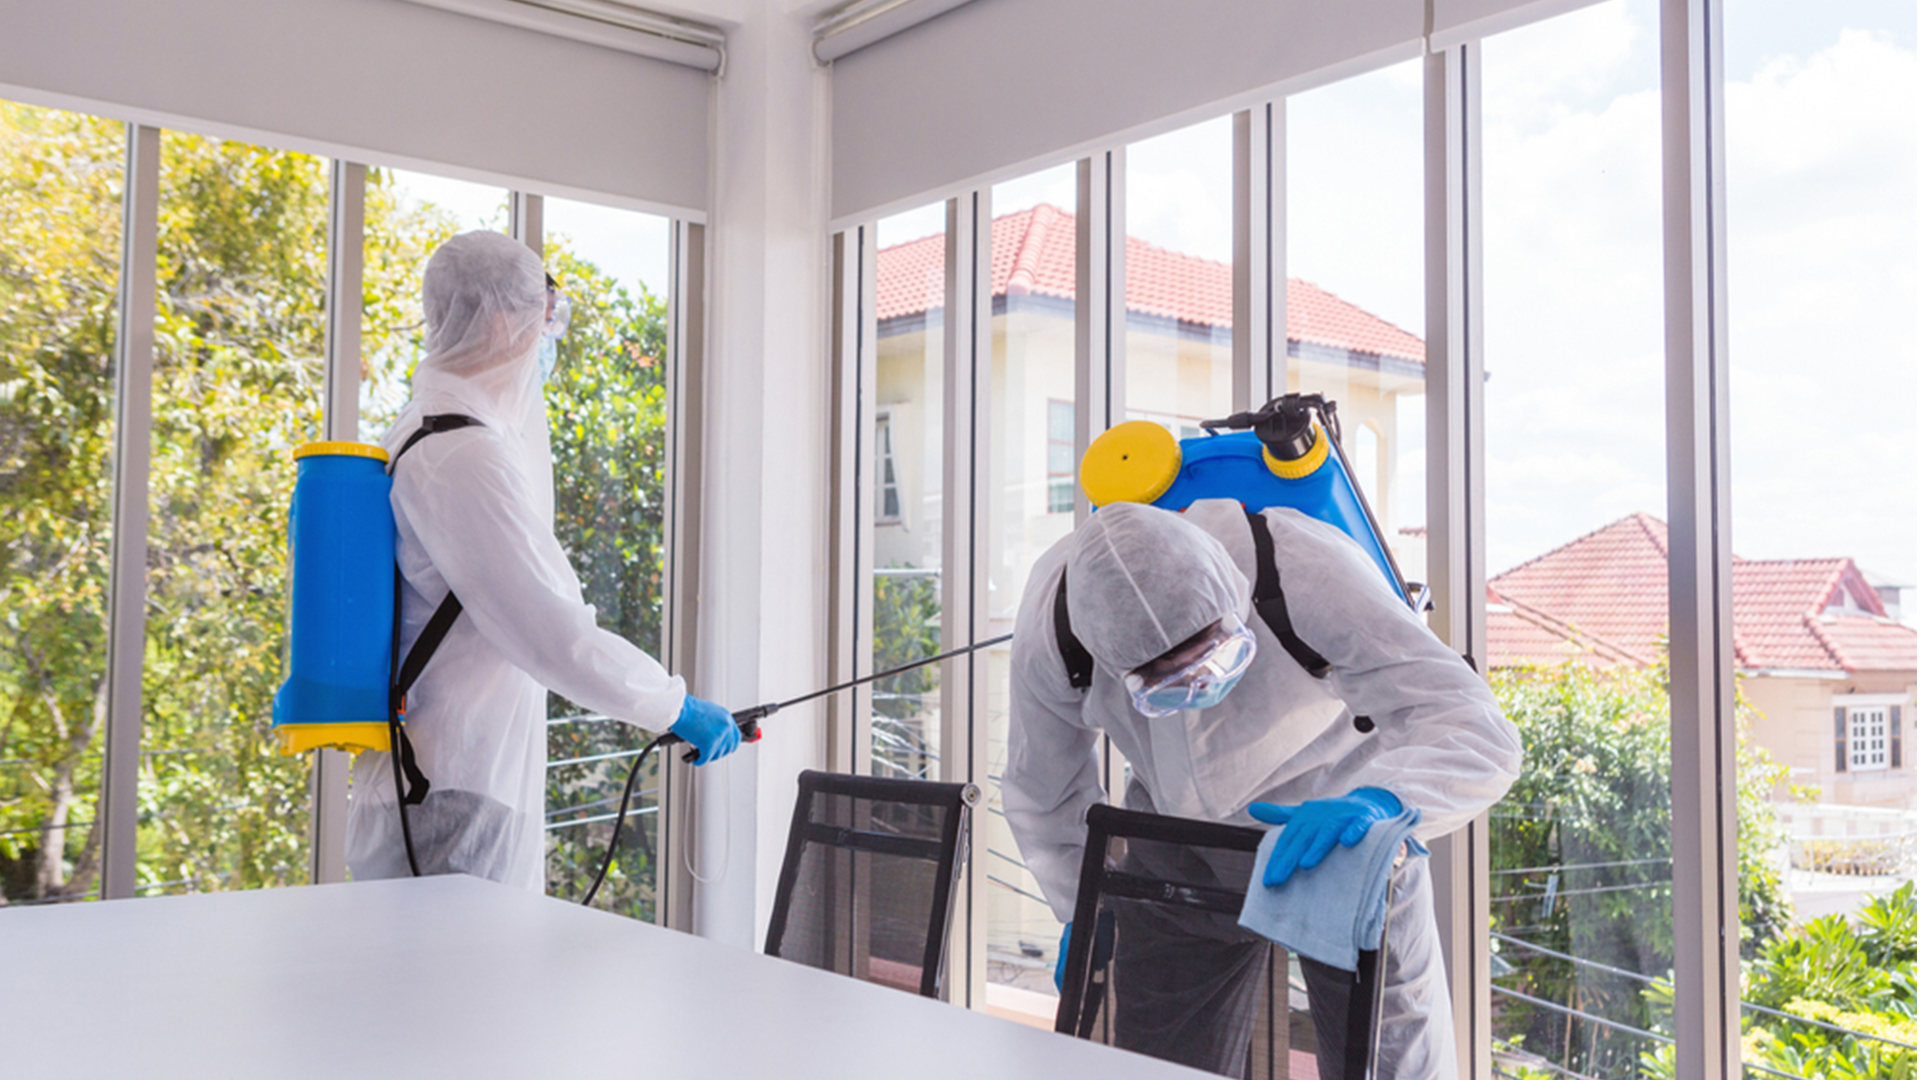 DIY Vs Commercial Disinfectant Cleaning - What To Do?